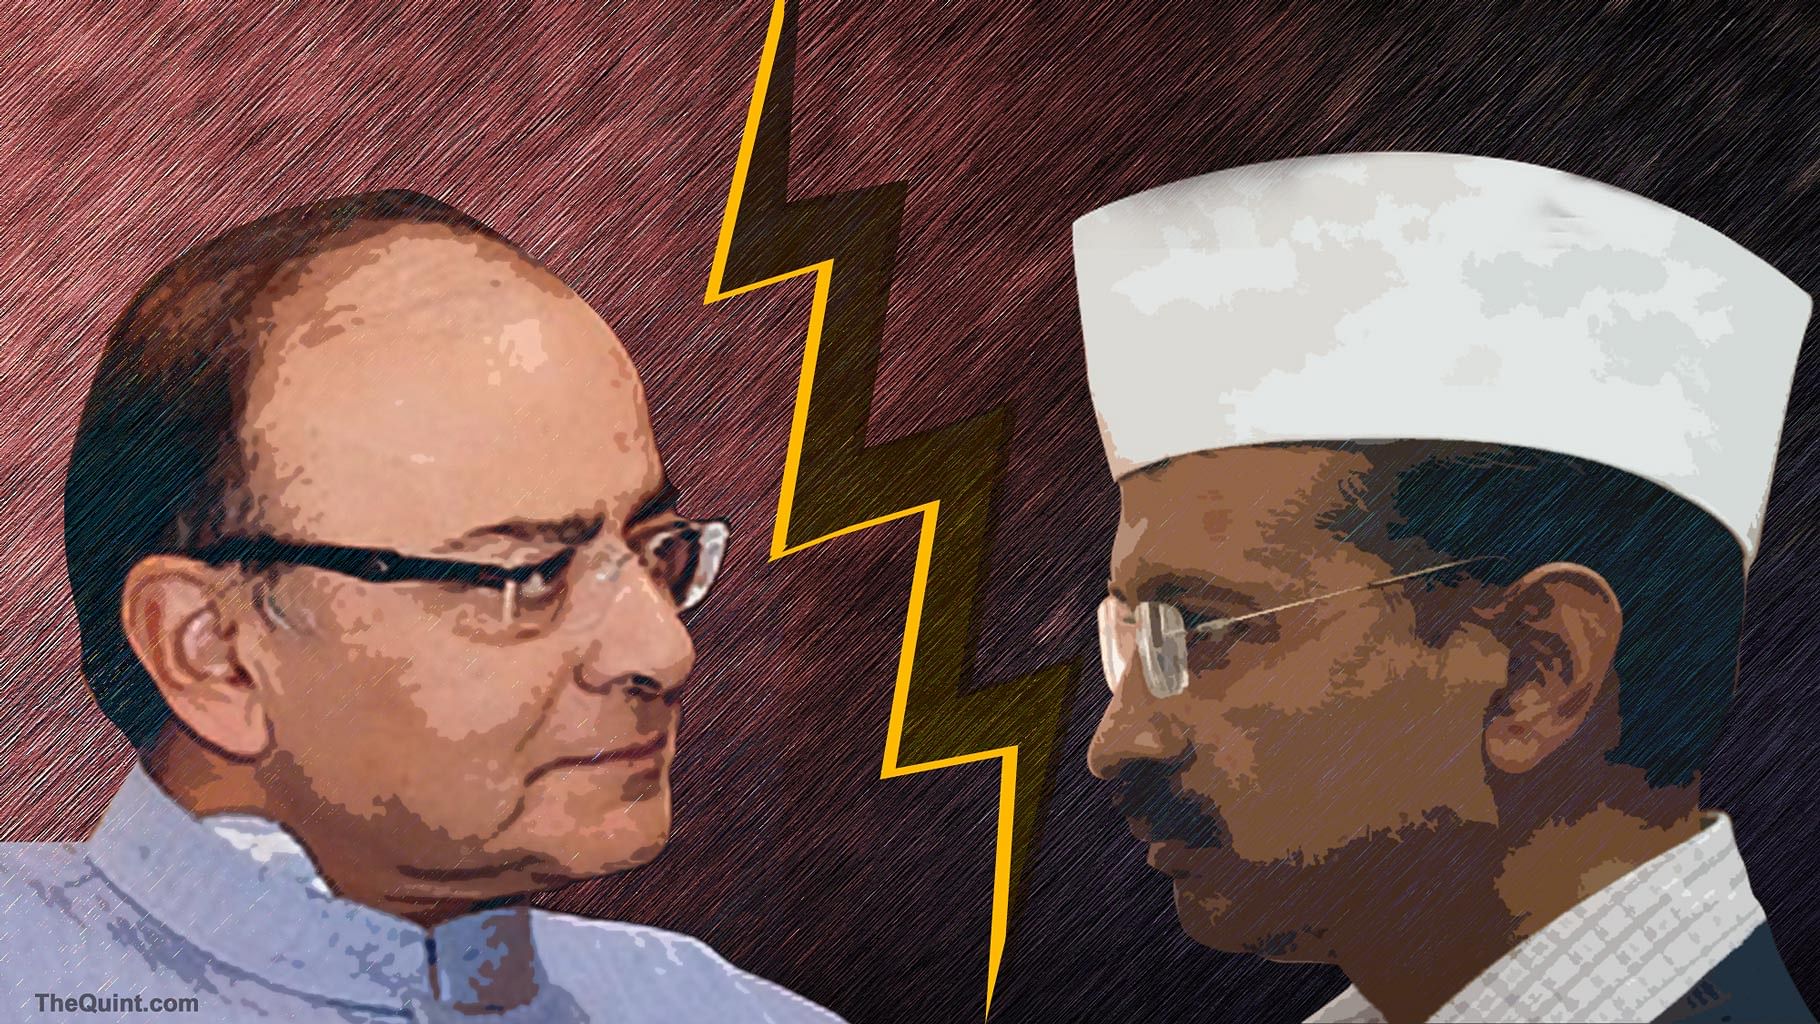 Arvind Kejriwal was sued by Arun Jaitley for defamation last year. (Photo: The Quint)